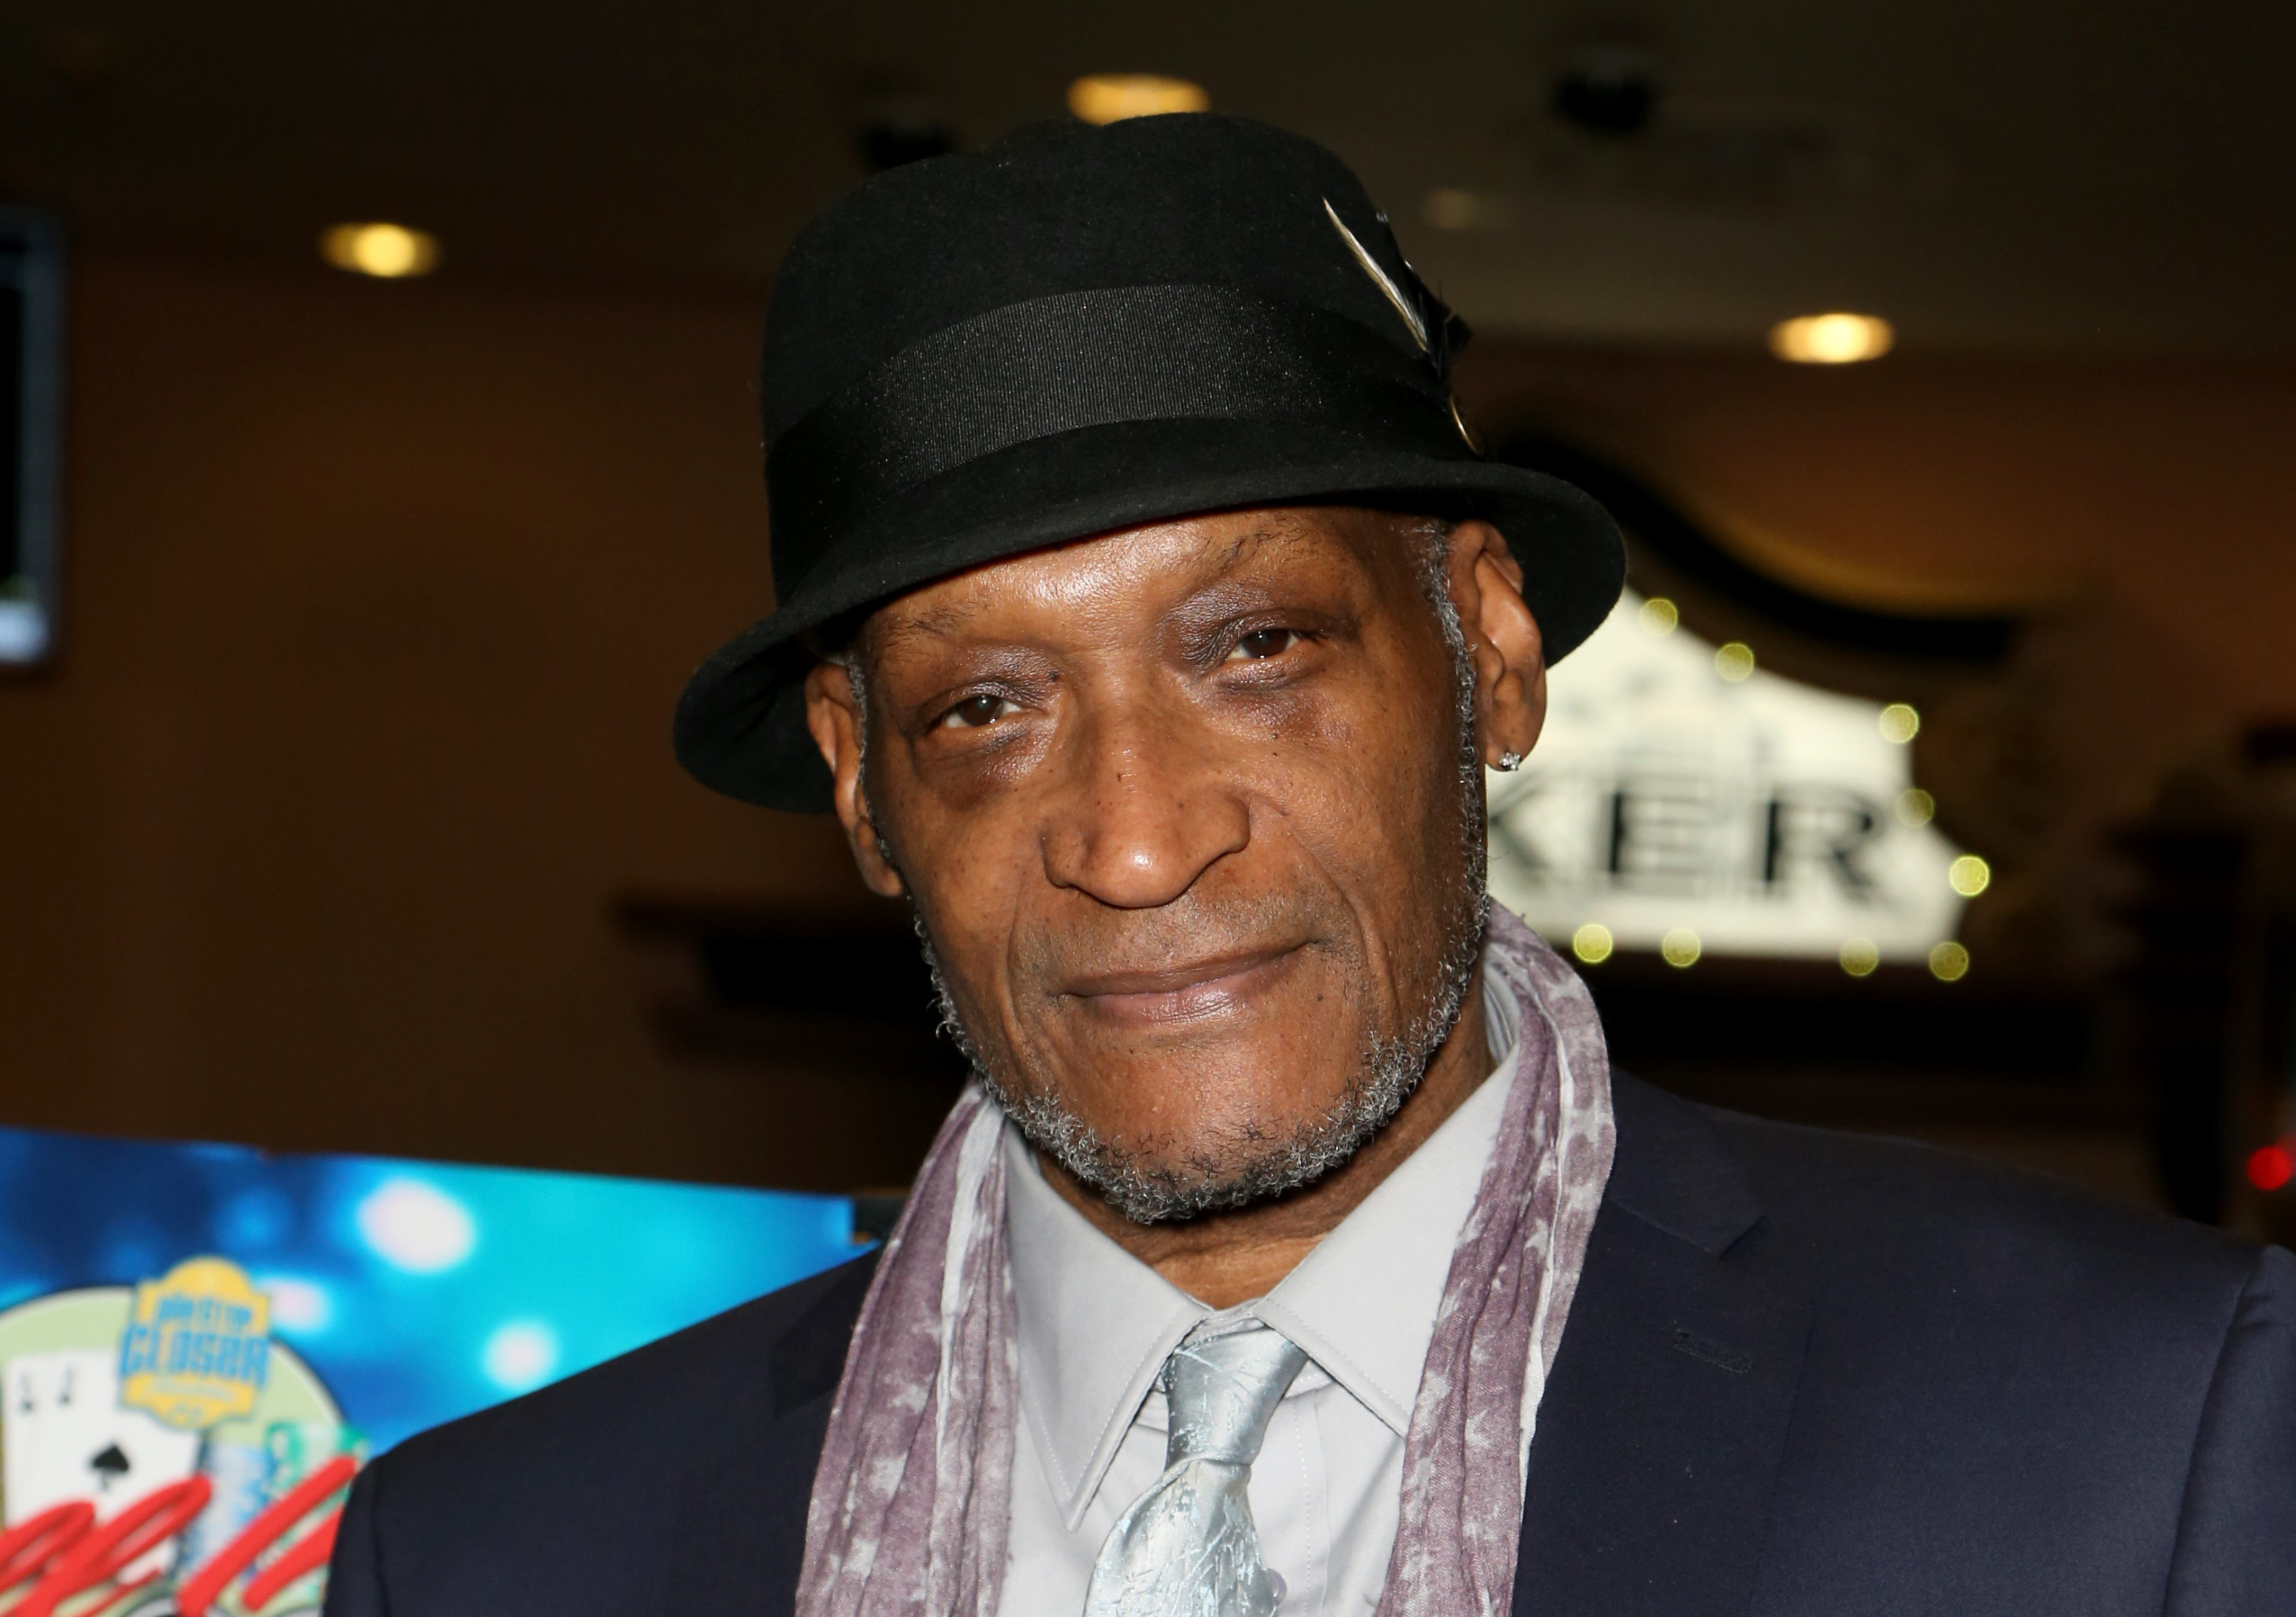 Top 10 Tony Todd Roles (Besides Candyman) - HorrorGeekLife